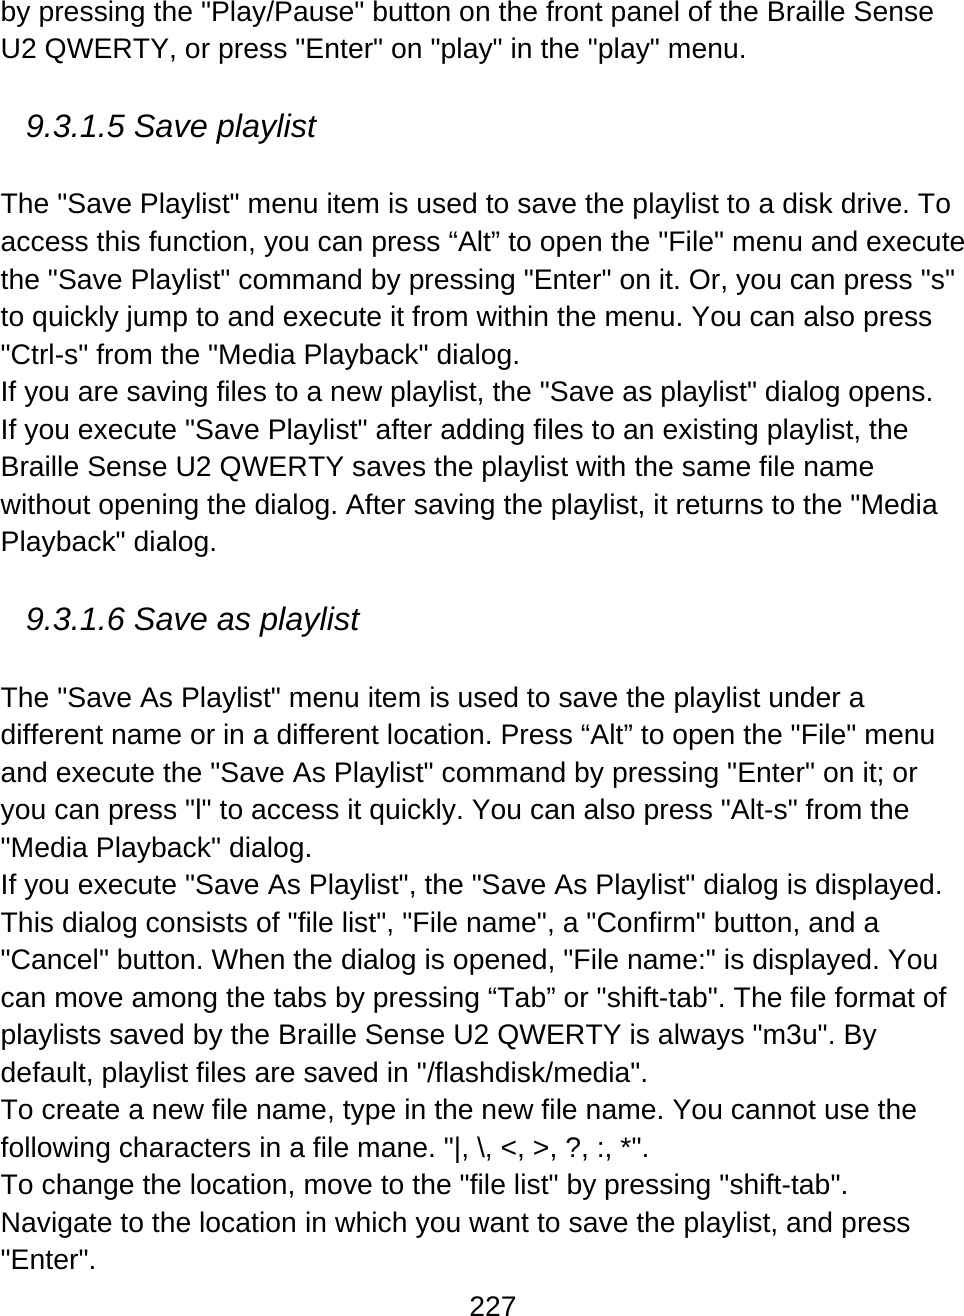 227  by pressing the &quot;Play/Pause&quot; button on the front panel of the Braille Sense U2 QWERTY, or press &quot;Enter&quot; on &quot;play&quot; in the &quot;play&quot; menu.   9.3.1.5 Save playlist  The &quot;Save Playlist&quot; menu item is used to save the playlist to a disk drive. To access this function, you can press “Alt” to open the &quot;File&quot; menu and execute the &quot;Save Playlist&quot; command by pressing &quot;Enter&quot; on it. Or, you can press &quot;s&quot; to quickly jump to and execute it from within the menu. You can also press &quot;Ctrl-s&quot; from the &quot;Media Playback&quot; dialog. If you are saving files to a new playlist, the &quot;Save as playlist&quot; dialog opens.  If you execute &quot;Save Playlist&quot; after adding files to an existing playlist, the Braille Sense U2 QWERTY saves the playlist with the same file name without opening the dialog. After saving the playlist, it returns to the &quot;Media Playback&quot; dialog.  9.3.1.6 Save as playlist  The &quot;Save As Playlist&quot; menu item is used to save the playlist under a different name or in a different location. Press “Alt” to open the &quot;File&quot; menu and execute the &quot;Save As Playlist&quot; command by pressing &quot;Enter&quot; on it; or you can press &quot;l&quot; to access it quickly. You can also press &quot;Alt-s&quot; from the &quot;Media Playback&quot; dialog.  If you execute &quot;Save As Playlist&quot;, the &quot;Save As Playlist&quot; dialog is displayed. This dialog consists of &quot;file list&quot;, &quot;File name&quot;, a &quot;Confirm&quot; button, and a &quot;Cancel&quot; button. When the dialog is opened, &quot;File name:&quot; is displayed. You can move among the tabs by pressing “Tab” or &quot;shift-tab&quot;. The file format of playlists saved by the Braille Sense U2 QWERTY is always &quot;m3u&quot;. By default, playlist files are saved in &quot;/flashdisk/media&quot;. To create a new file name, type in the new file name. You cannot use the following characters in a file mane. &quot;|, \, &lt;, &gt;, ?, :, *&quot;. To change the location, move to the &quot;file list&quot; by pressing &quot;shift-tab&quot;. Navigate to the location in which you want to save the playlist, and press &quot;Enter&quot;. 